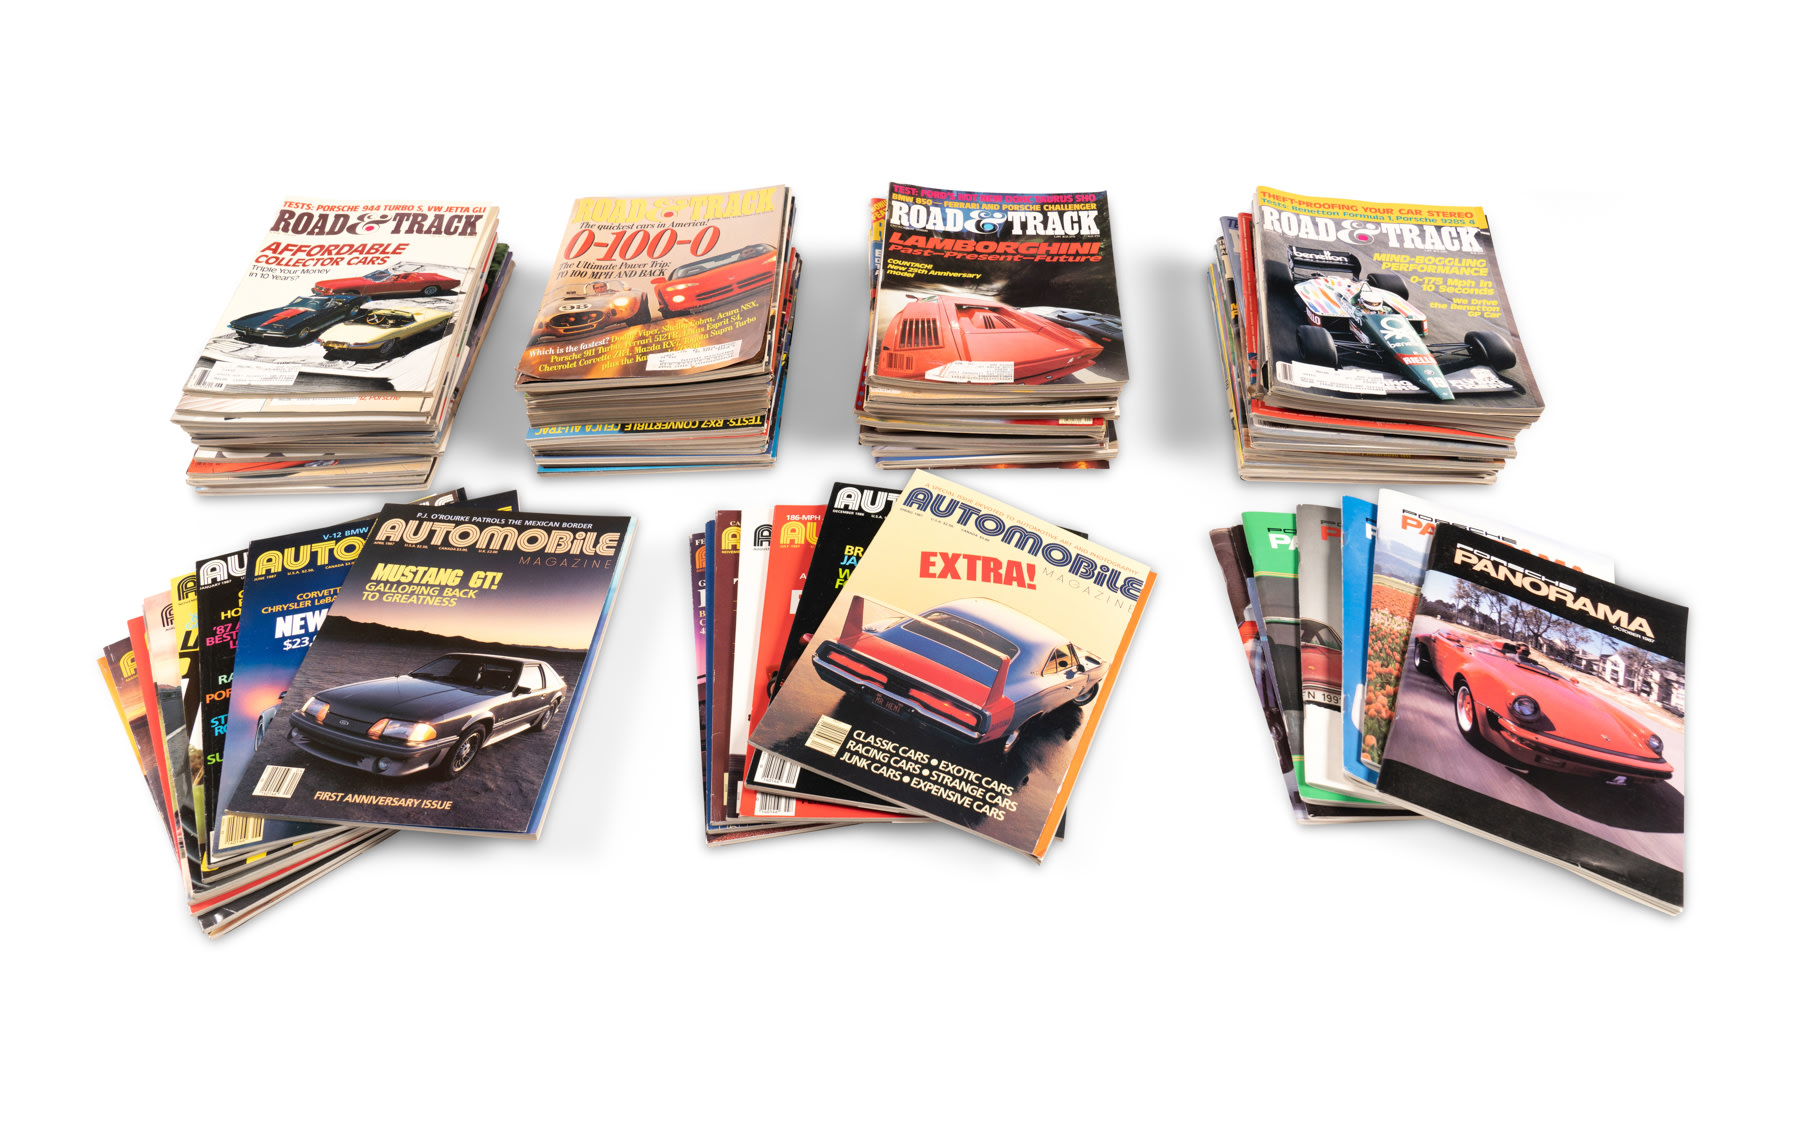 Assorted Magazines Including Road & Track and Panorama